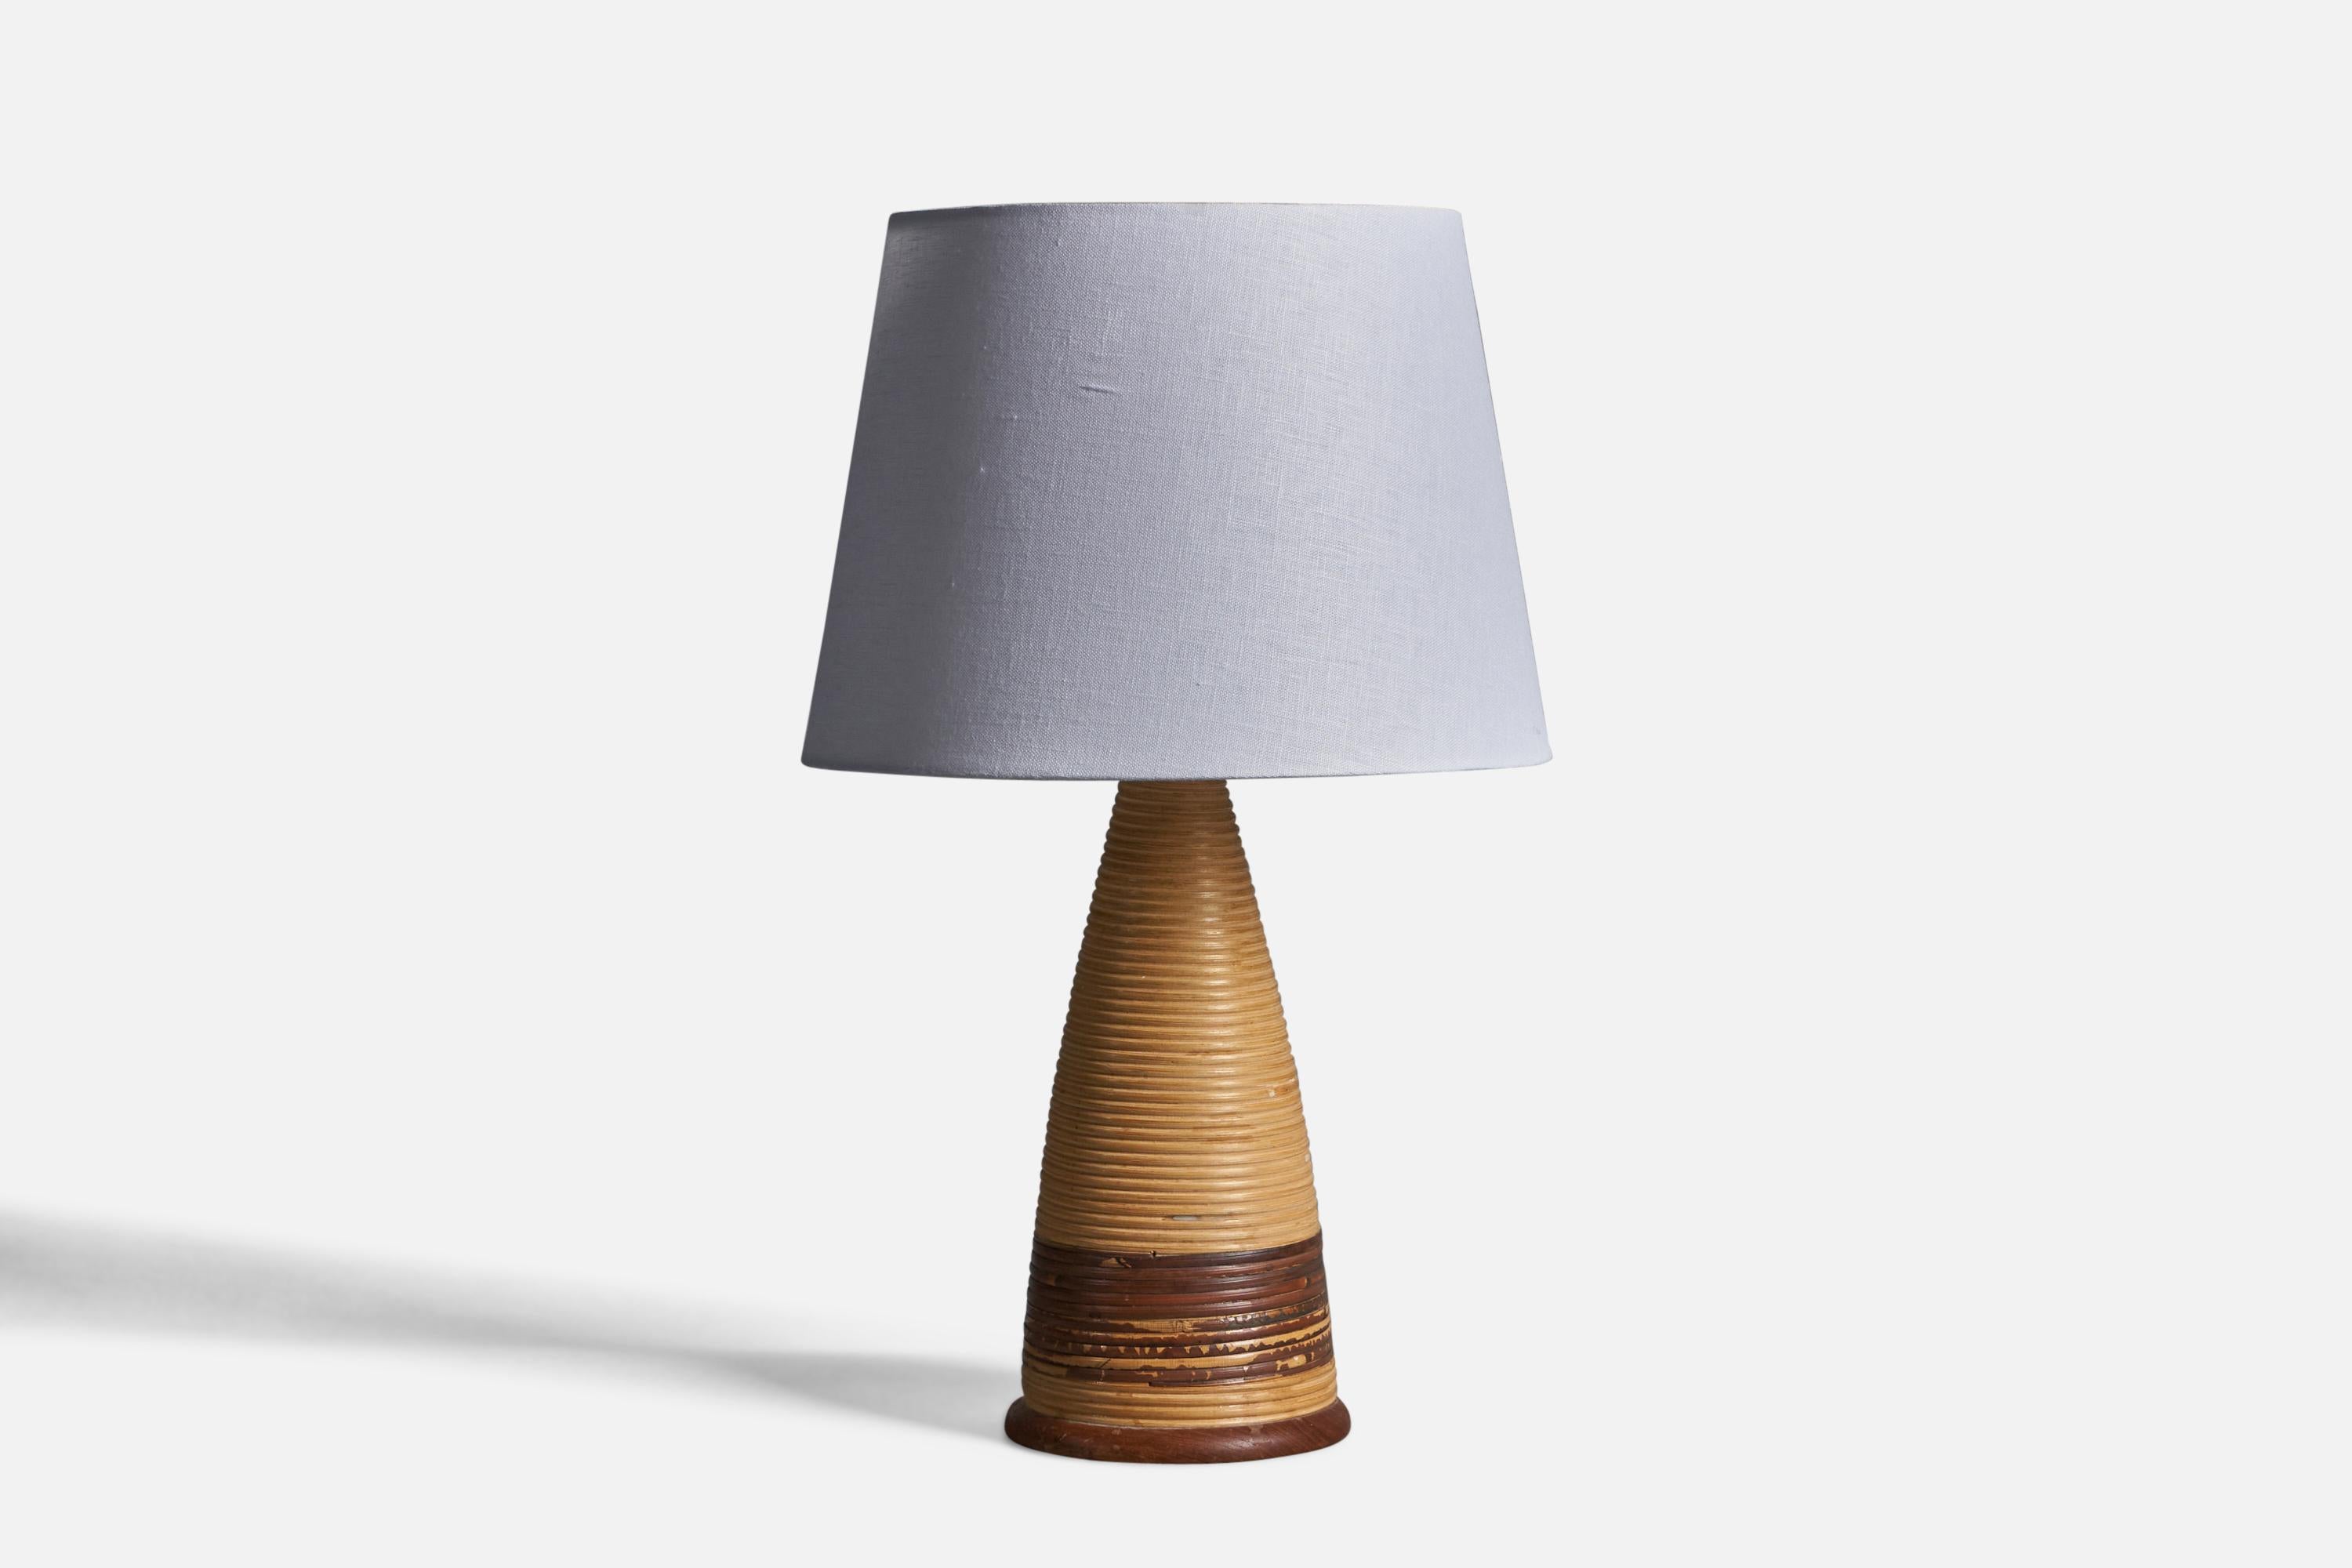 A rattan and teak table lamp, designed and produced in Denmark, 1950s.

Dimensions of Lamp (inches): 15